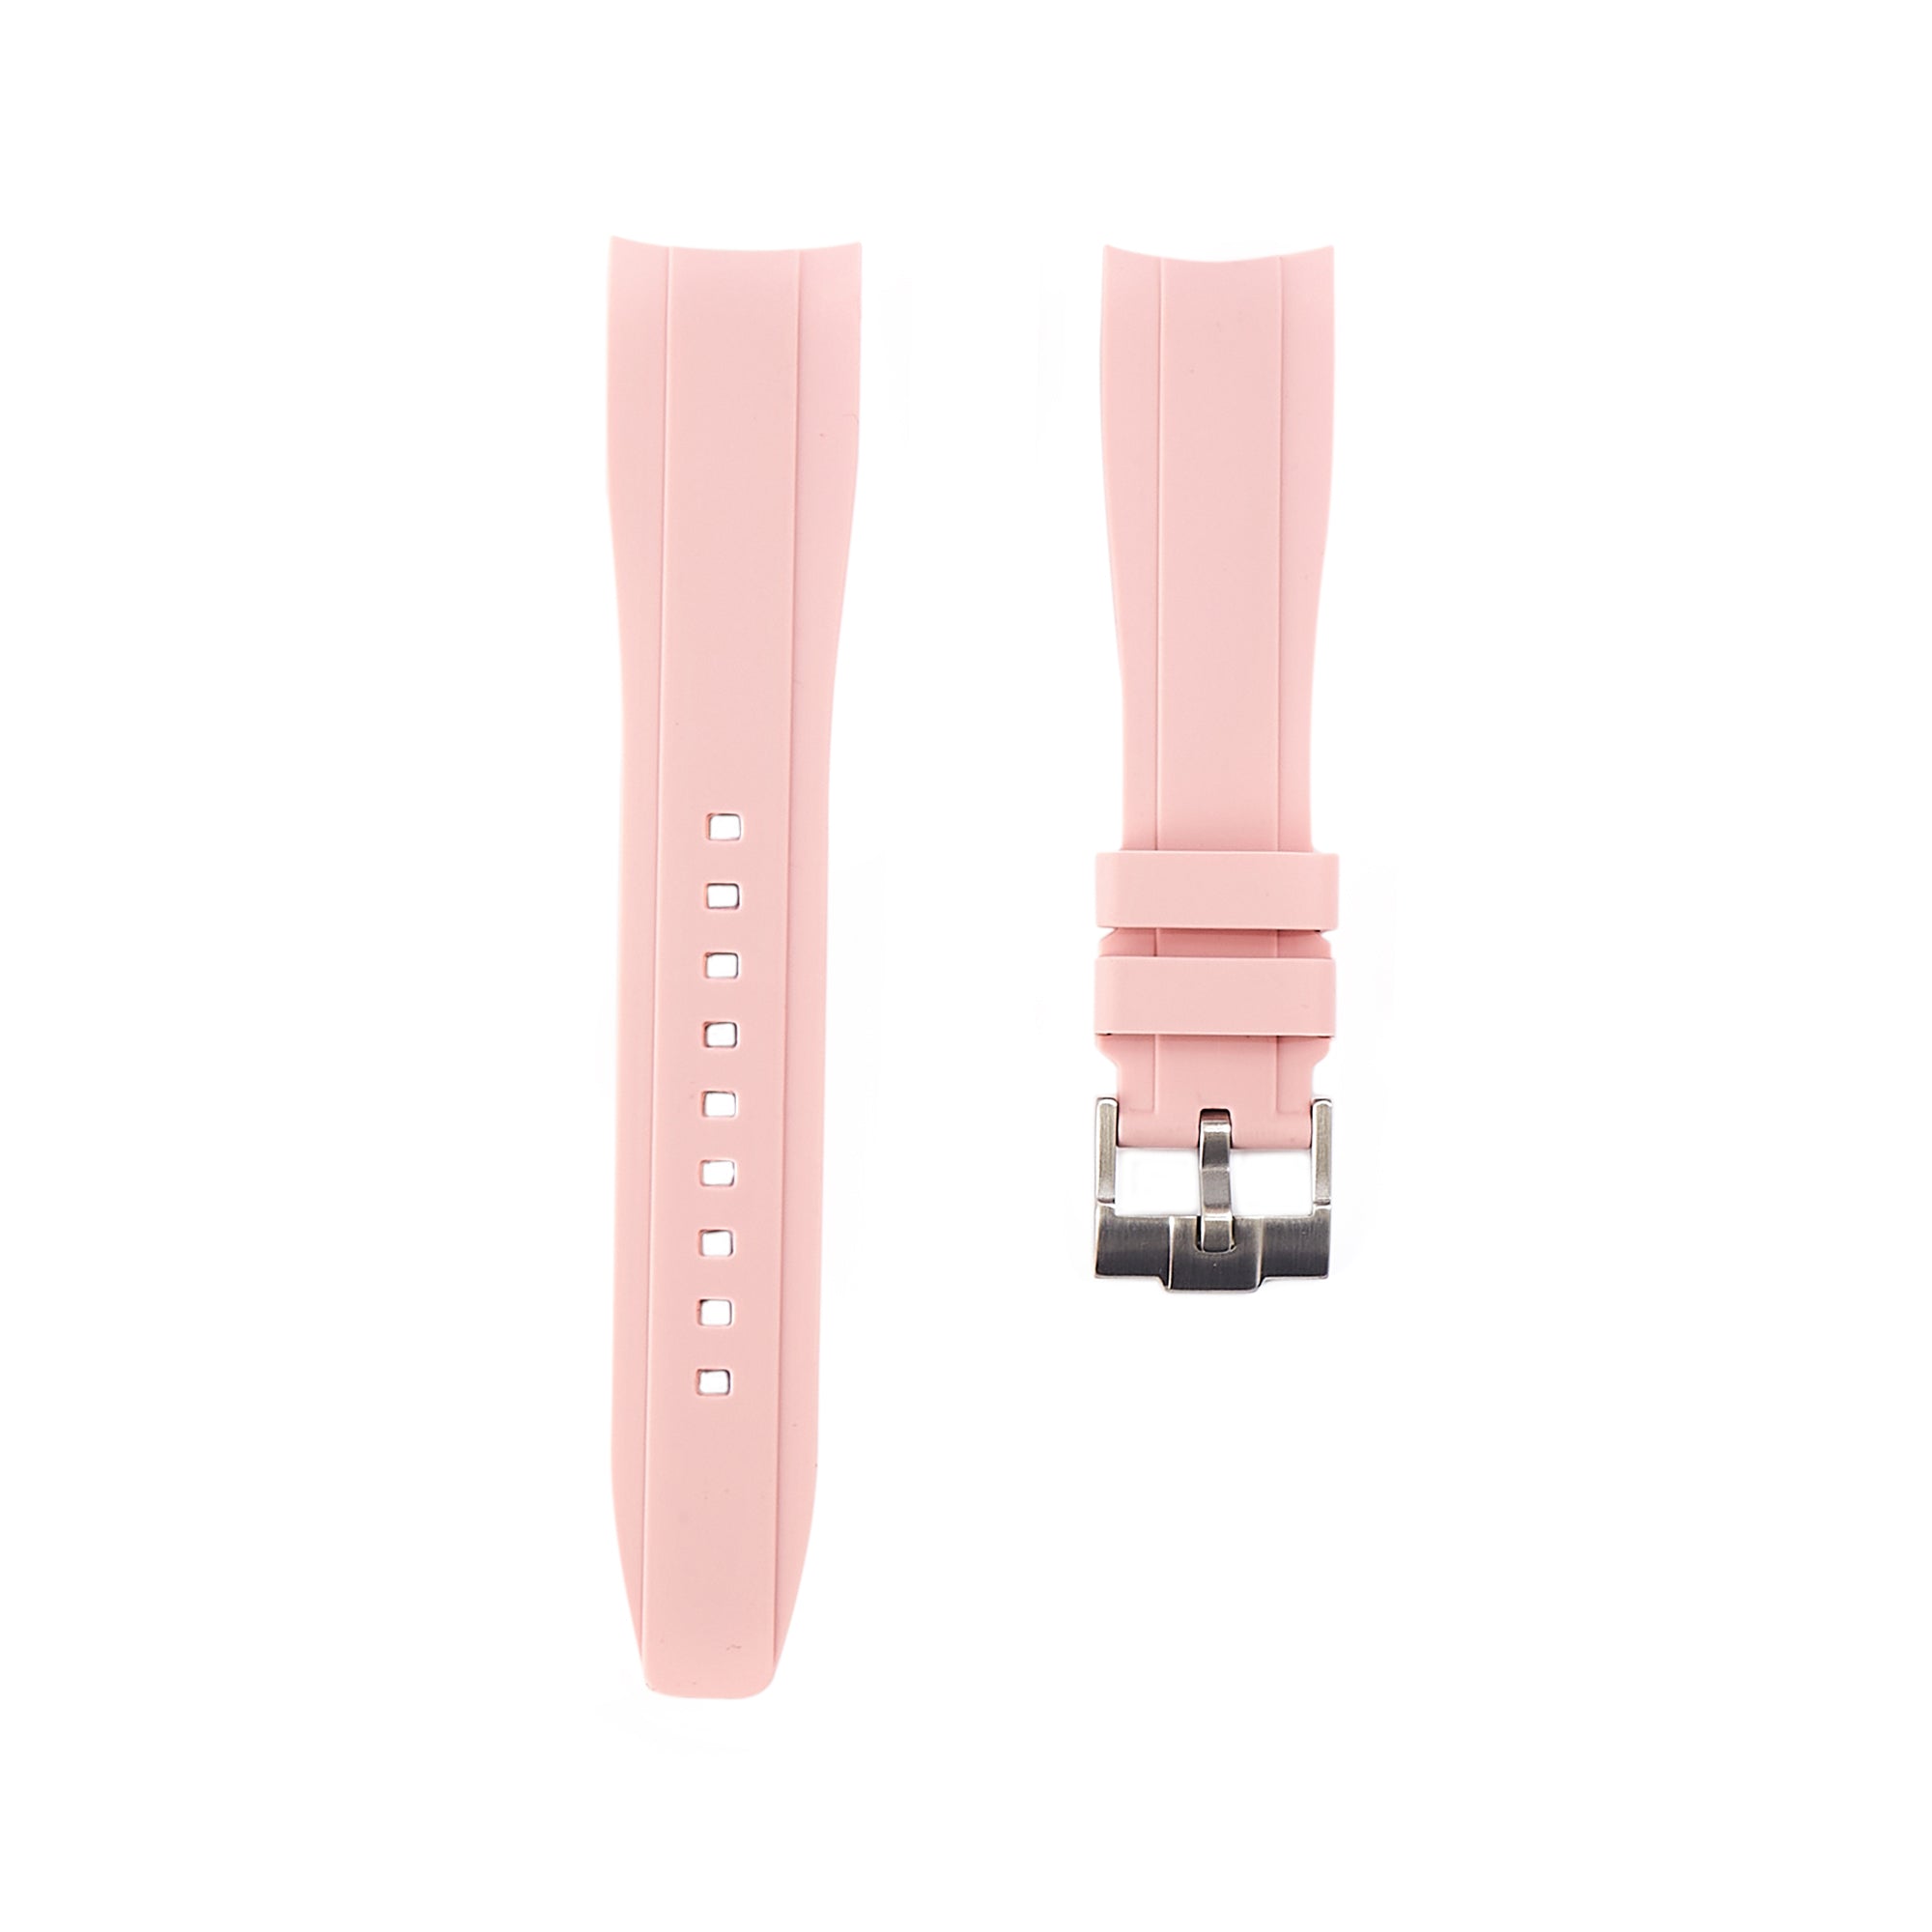 Curved End Soft Silicone Strap - Compatible with Omega Moonwatch - Light Pink (2418) -StrapSeeker